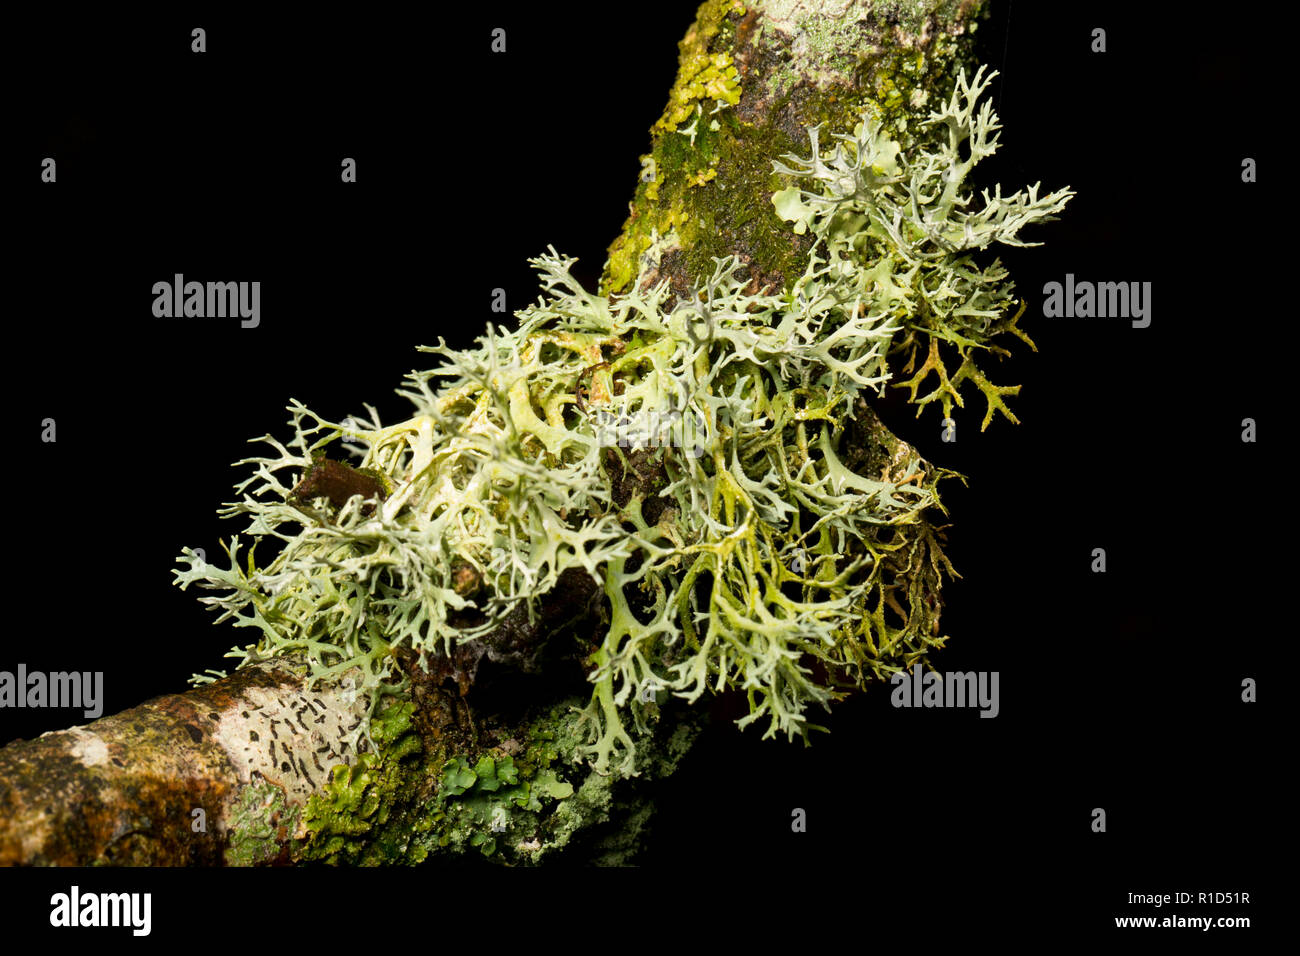 Oak moss, Evernia prunastri, growing on an oak branch in the New Forest. Oak moss is an example of a lichenised fungi. Lichens are very sensitive to a Stock Photo